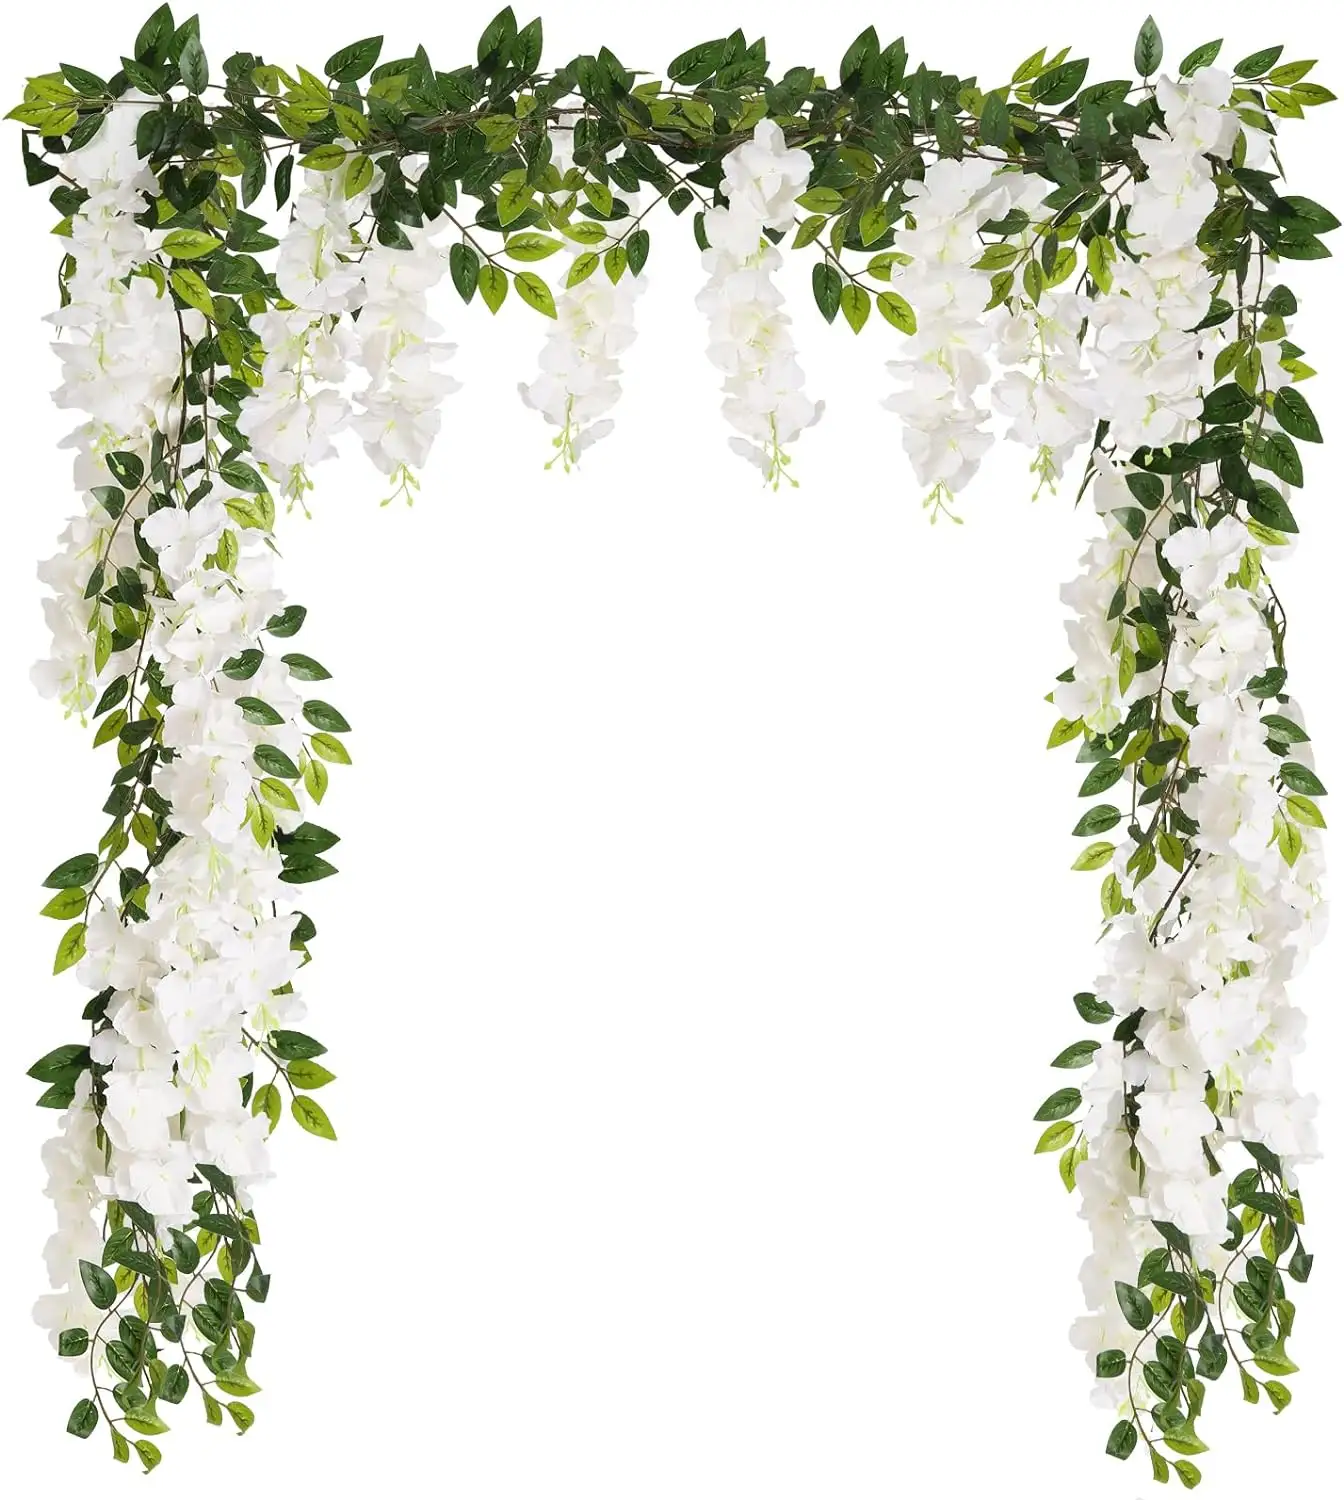 Wisteria Garland Wisteria Vines White Wisteria Rattan Silk Hanging Flowers for Wedding Arch Decorations Ceremony Garden Floral